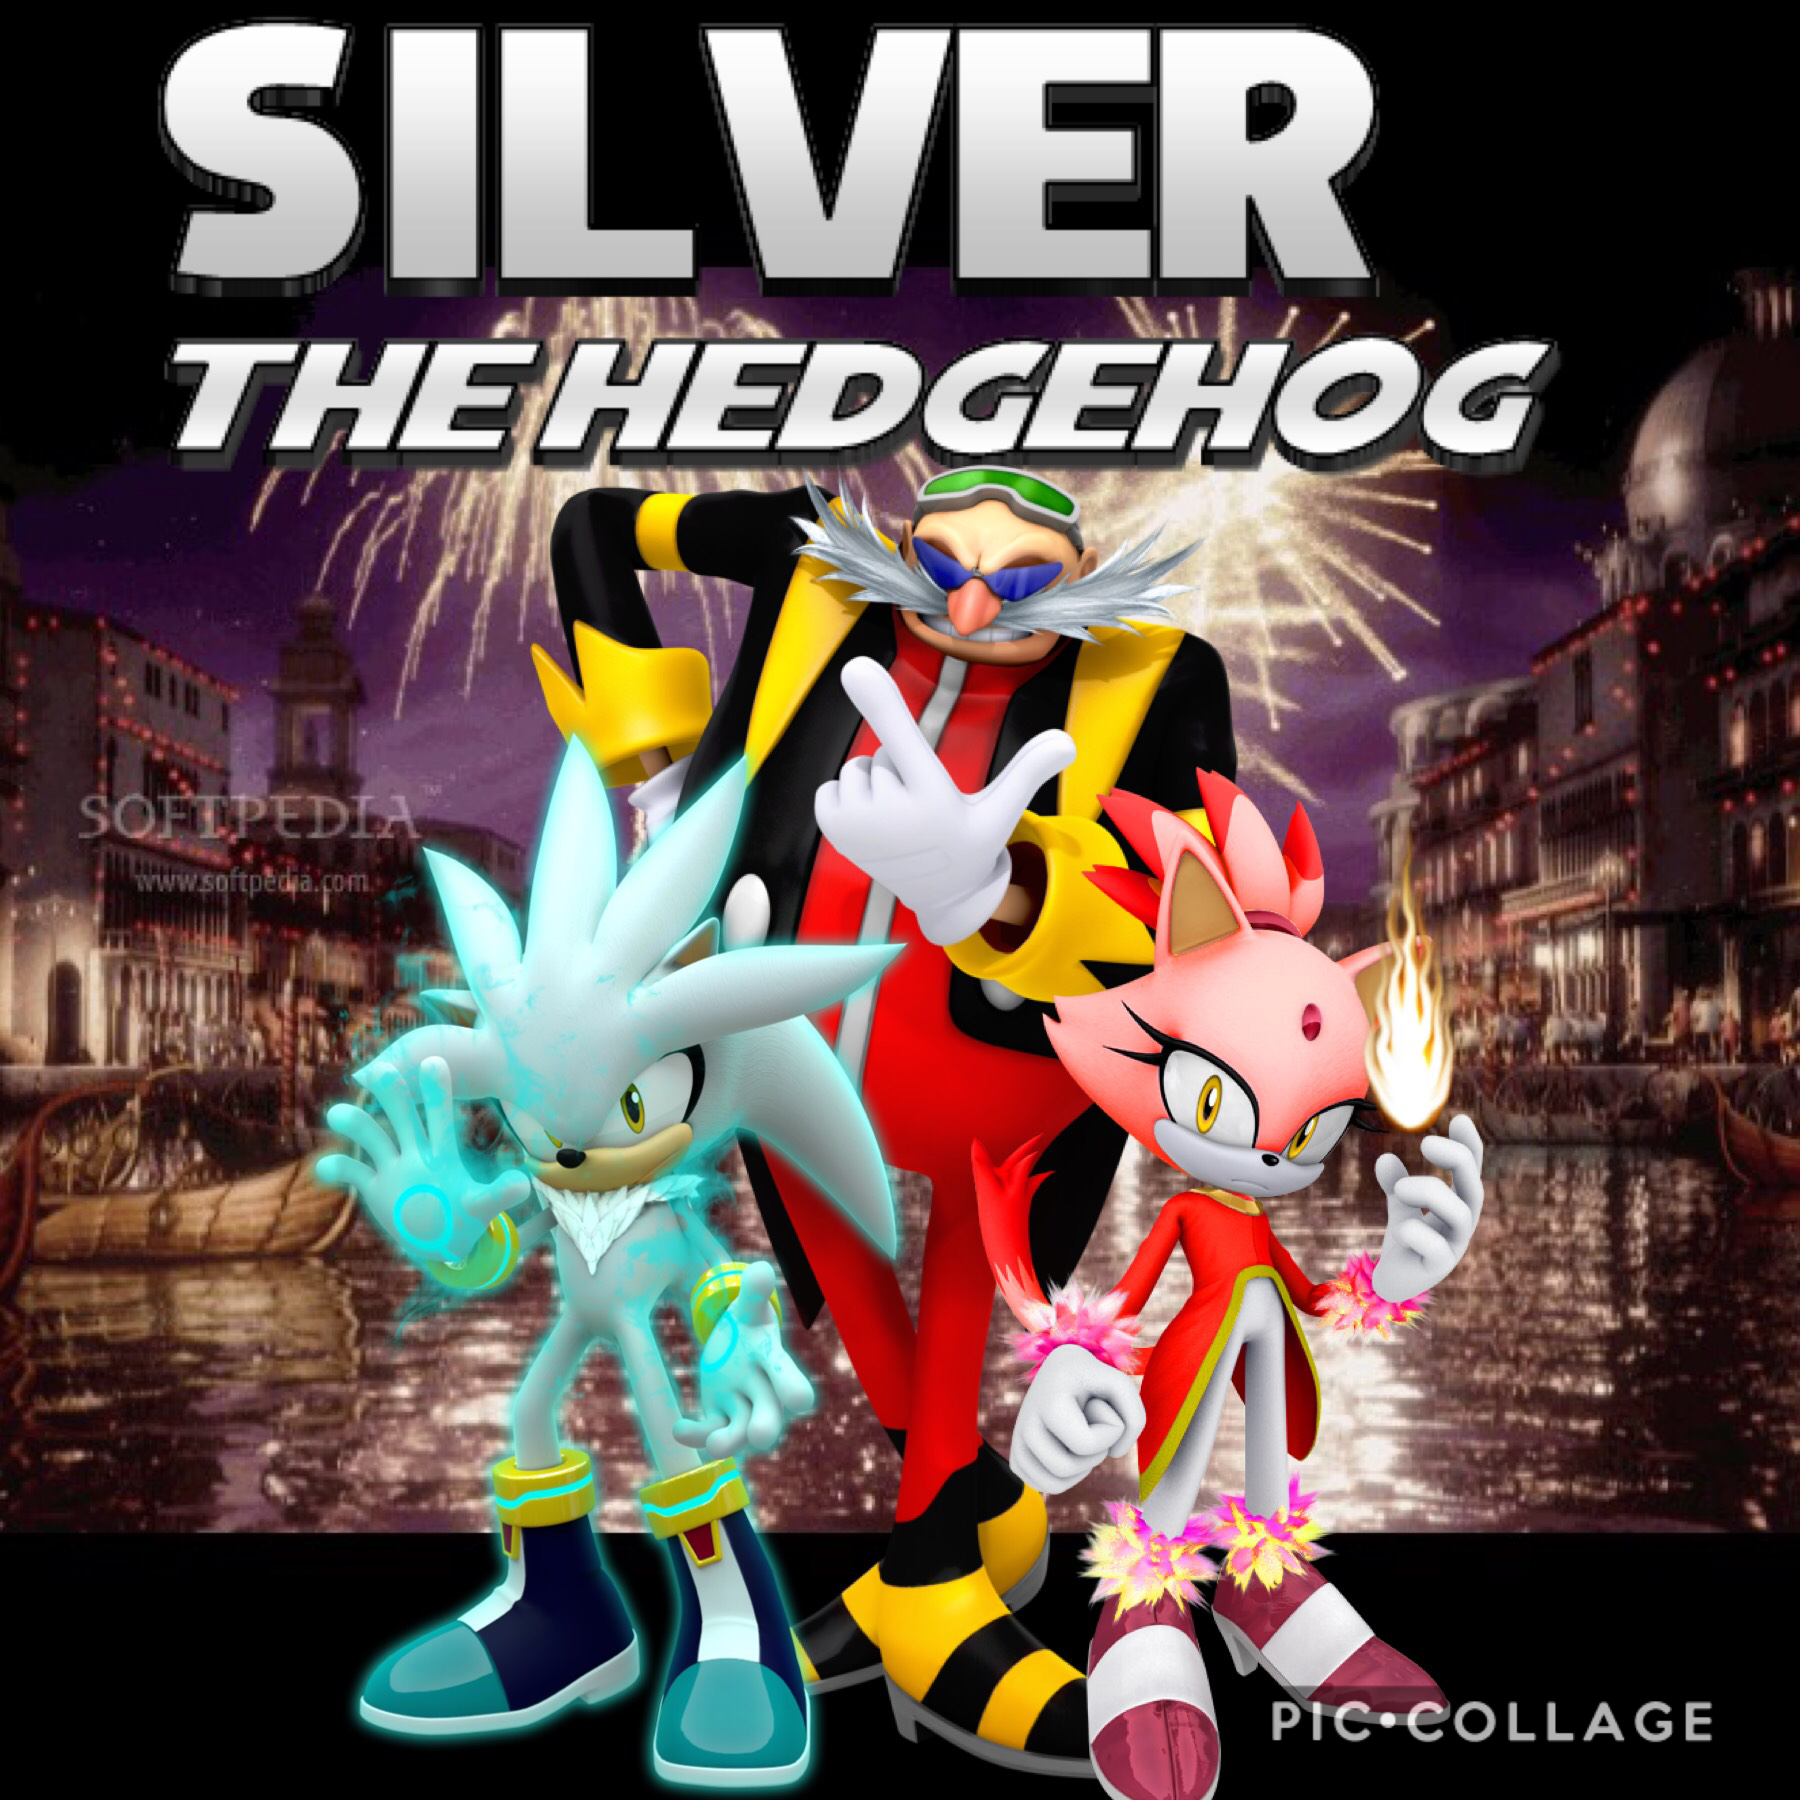 Why isn’t this a game!? Should have been right after sonic 06 because the resurrection of blaze happens in this game! (Dies in 06 back in generations)🤨